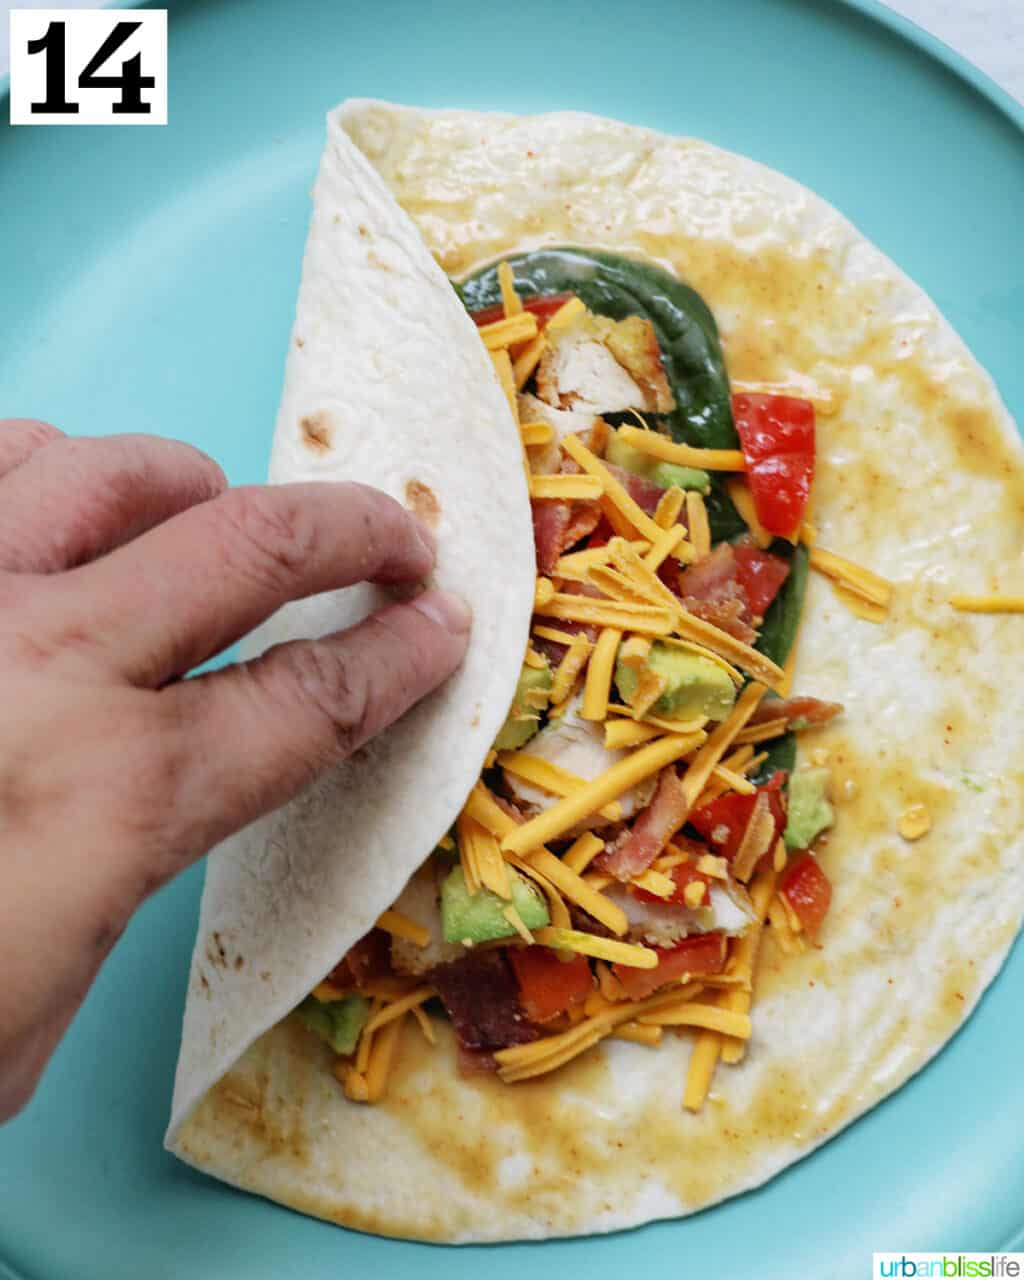 hand wrapping over one side of a tortilla over the filling.